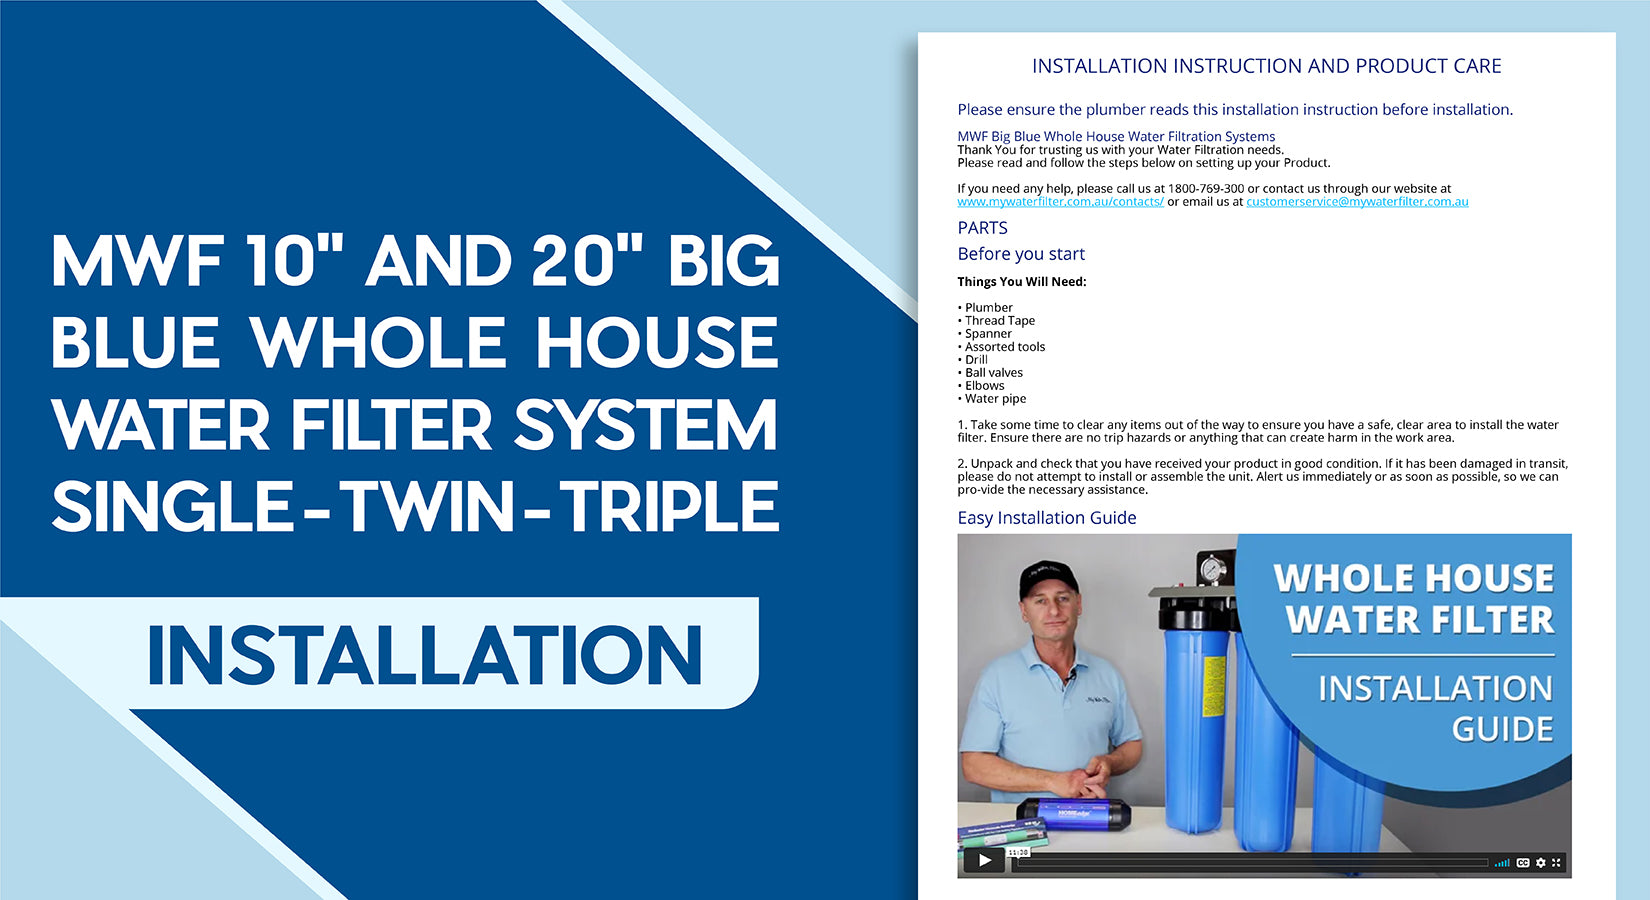 Should I Install My Whole House Water Filter Before or After the